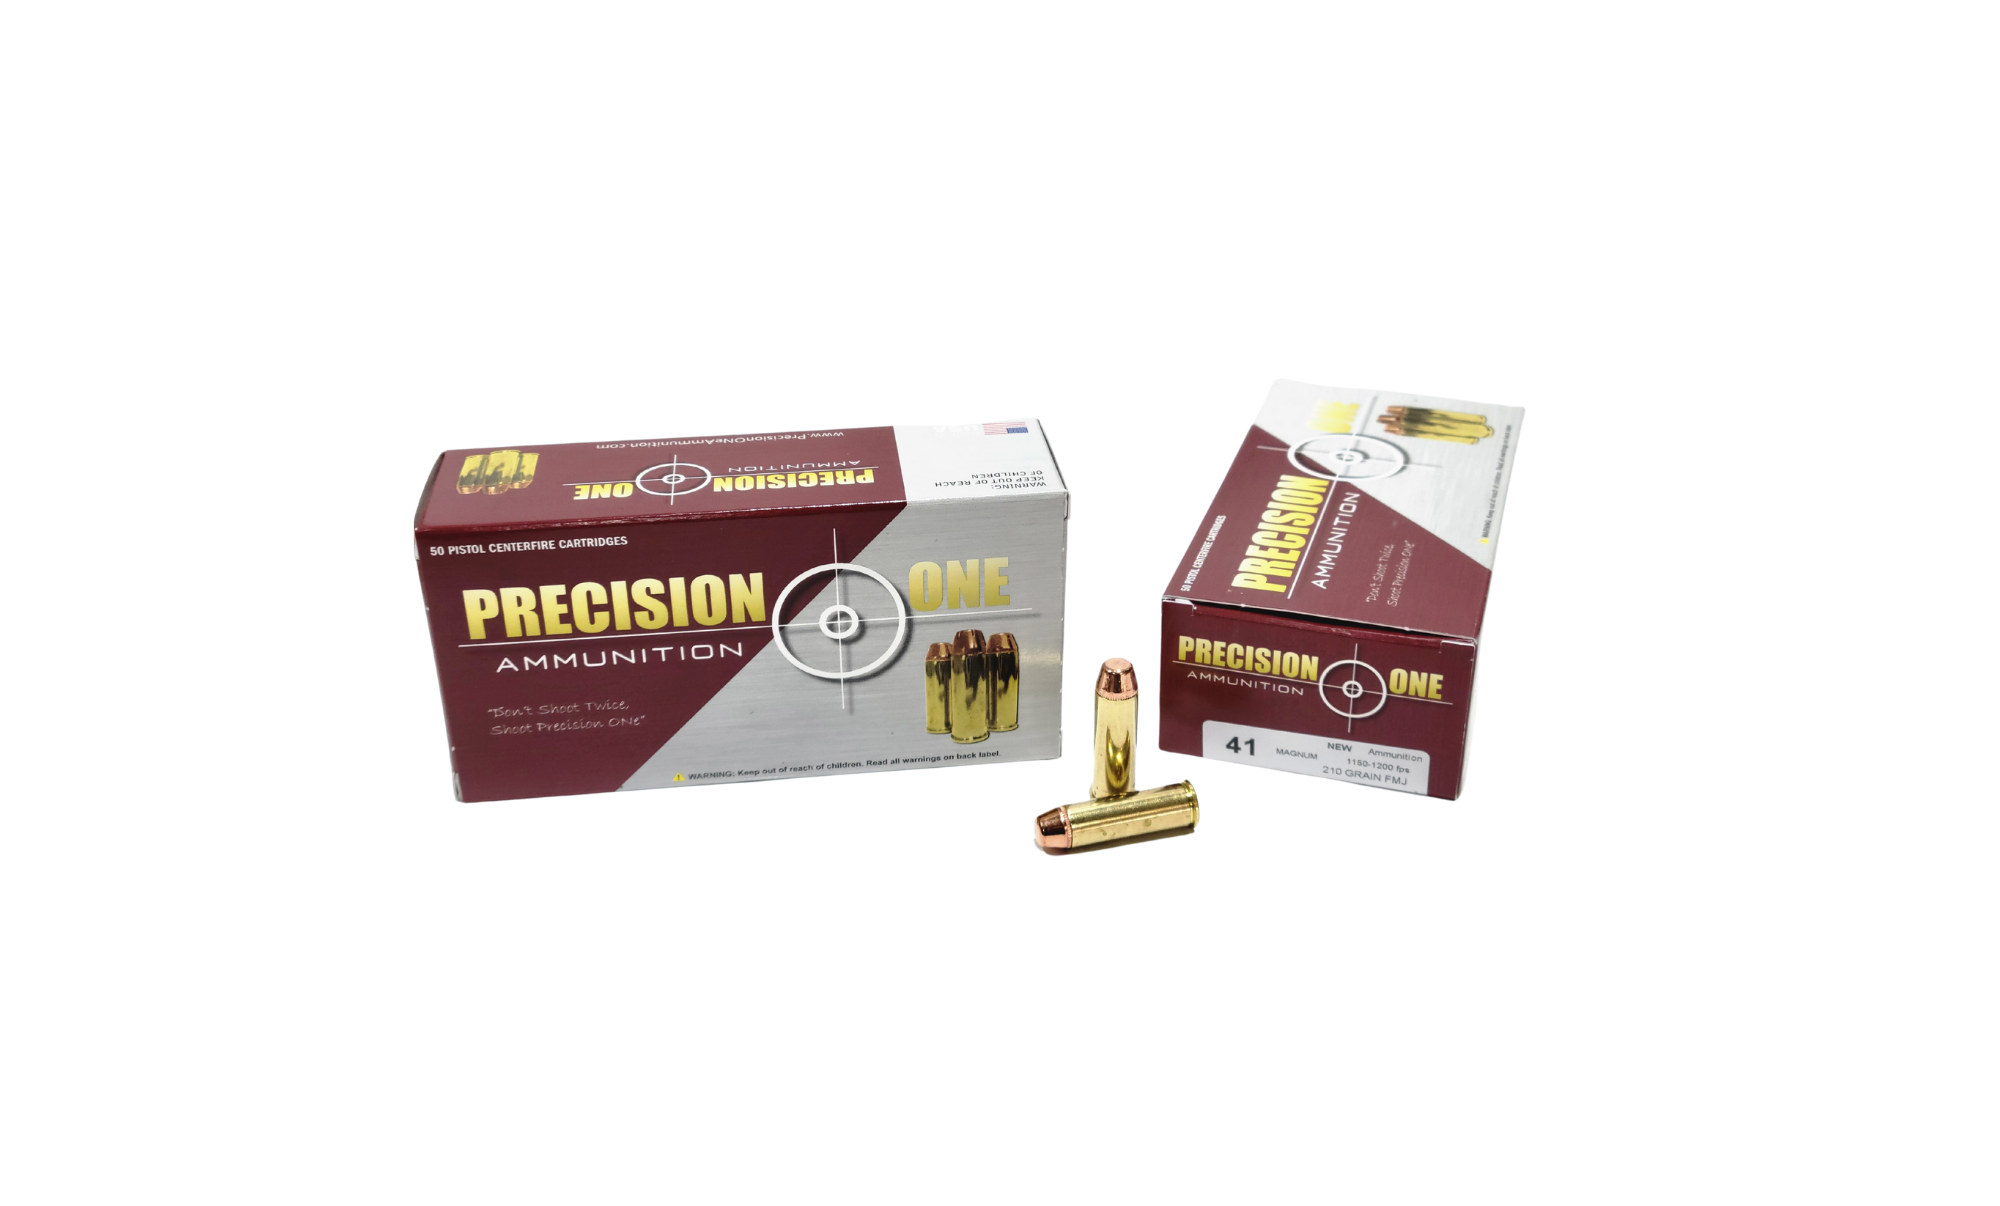 Precision One .41 Mag 210 Grain Full Metal Jacket - 50 Rounds (Box) [NO TAX outside Texas] FREE SHIPPING OVER $199